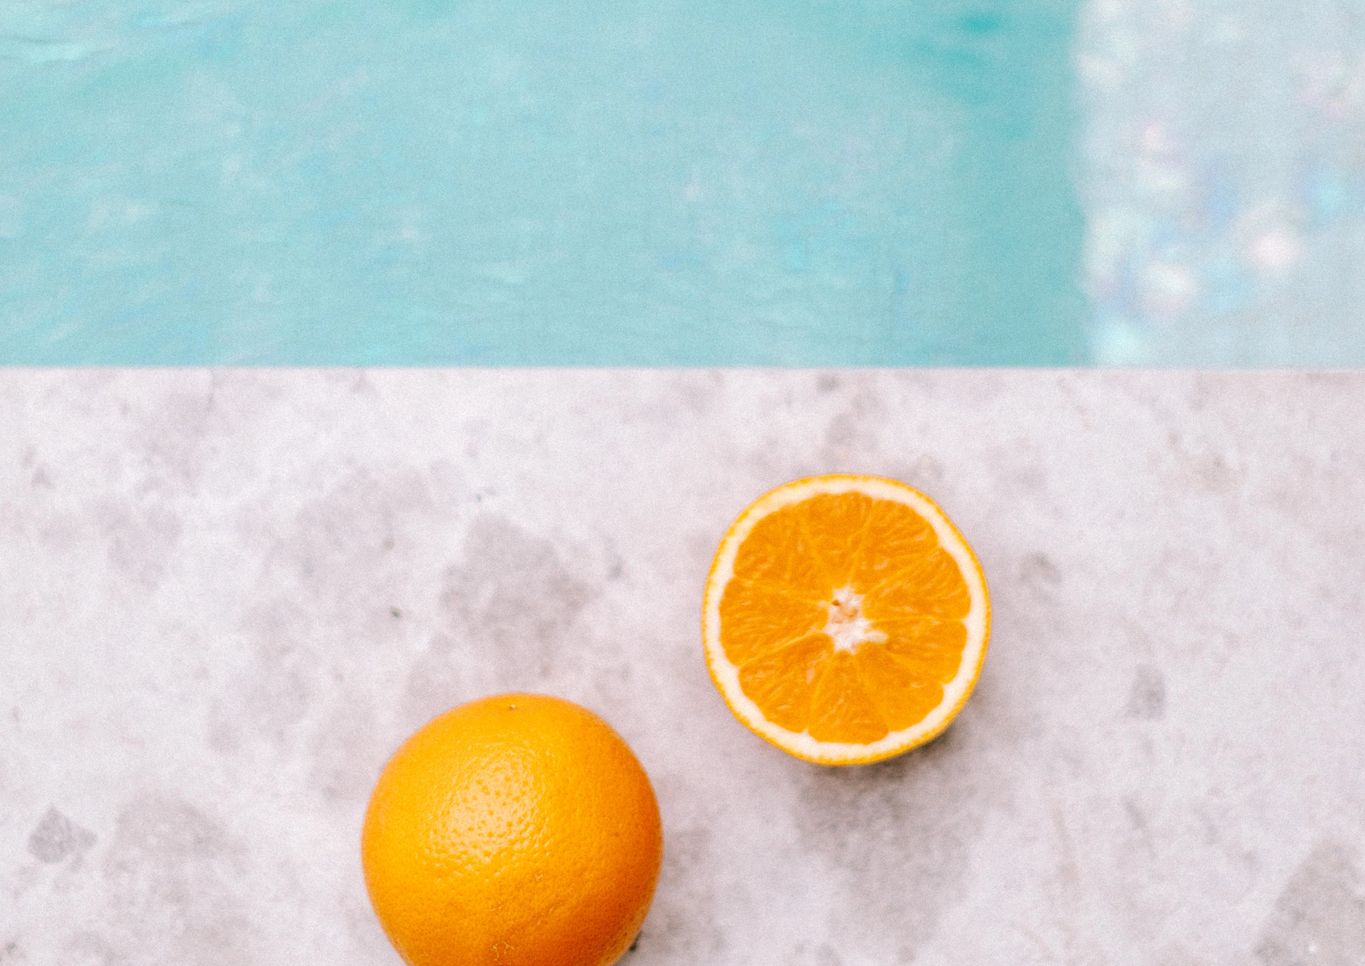 Pool paving with water and an orange in view